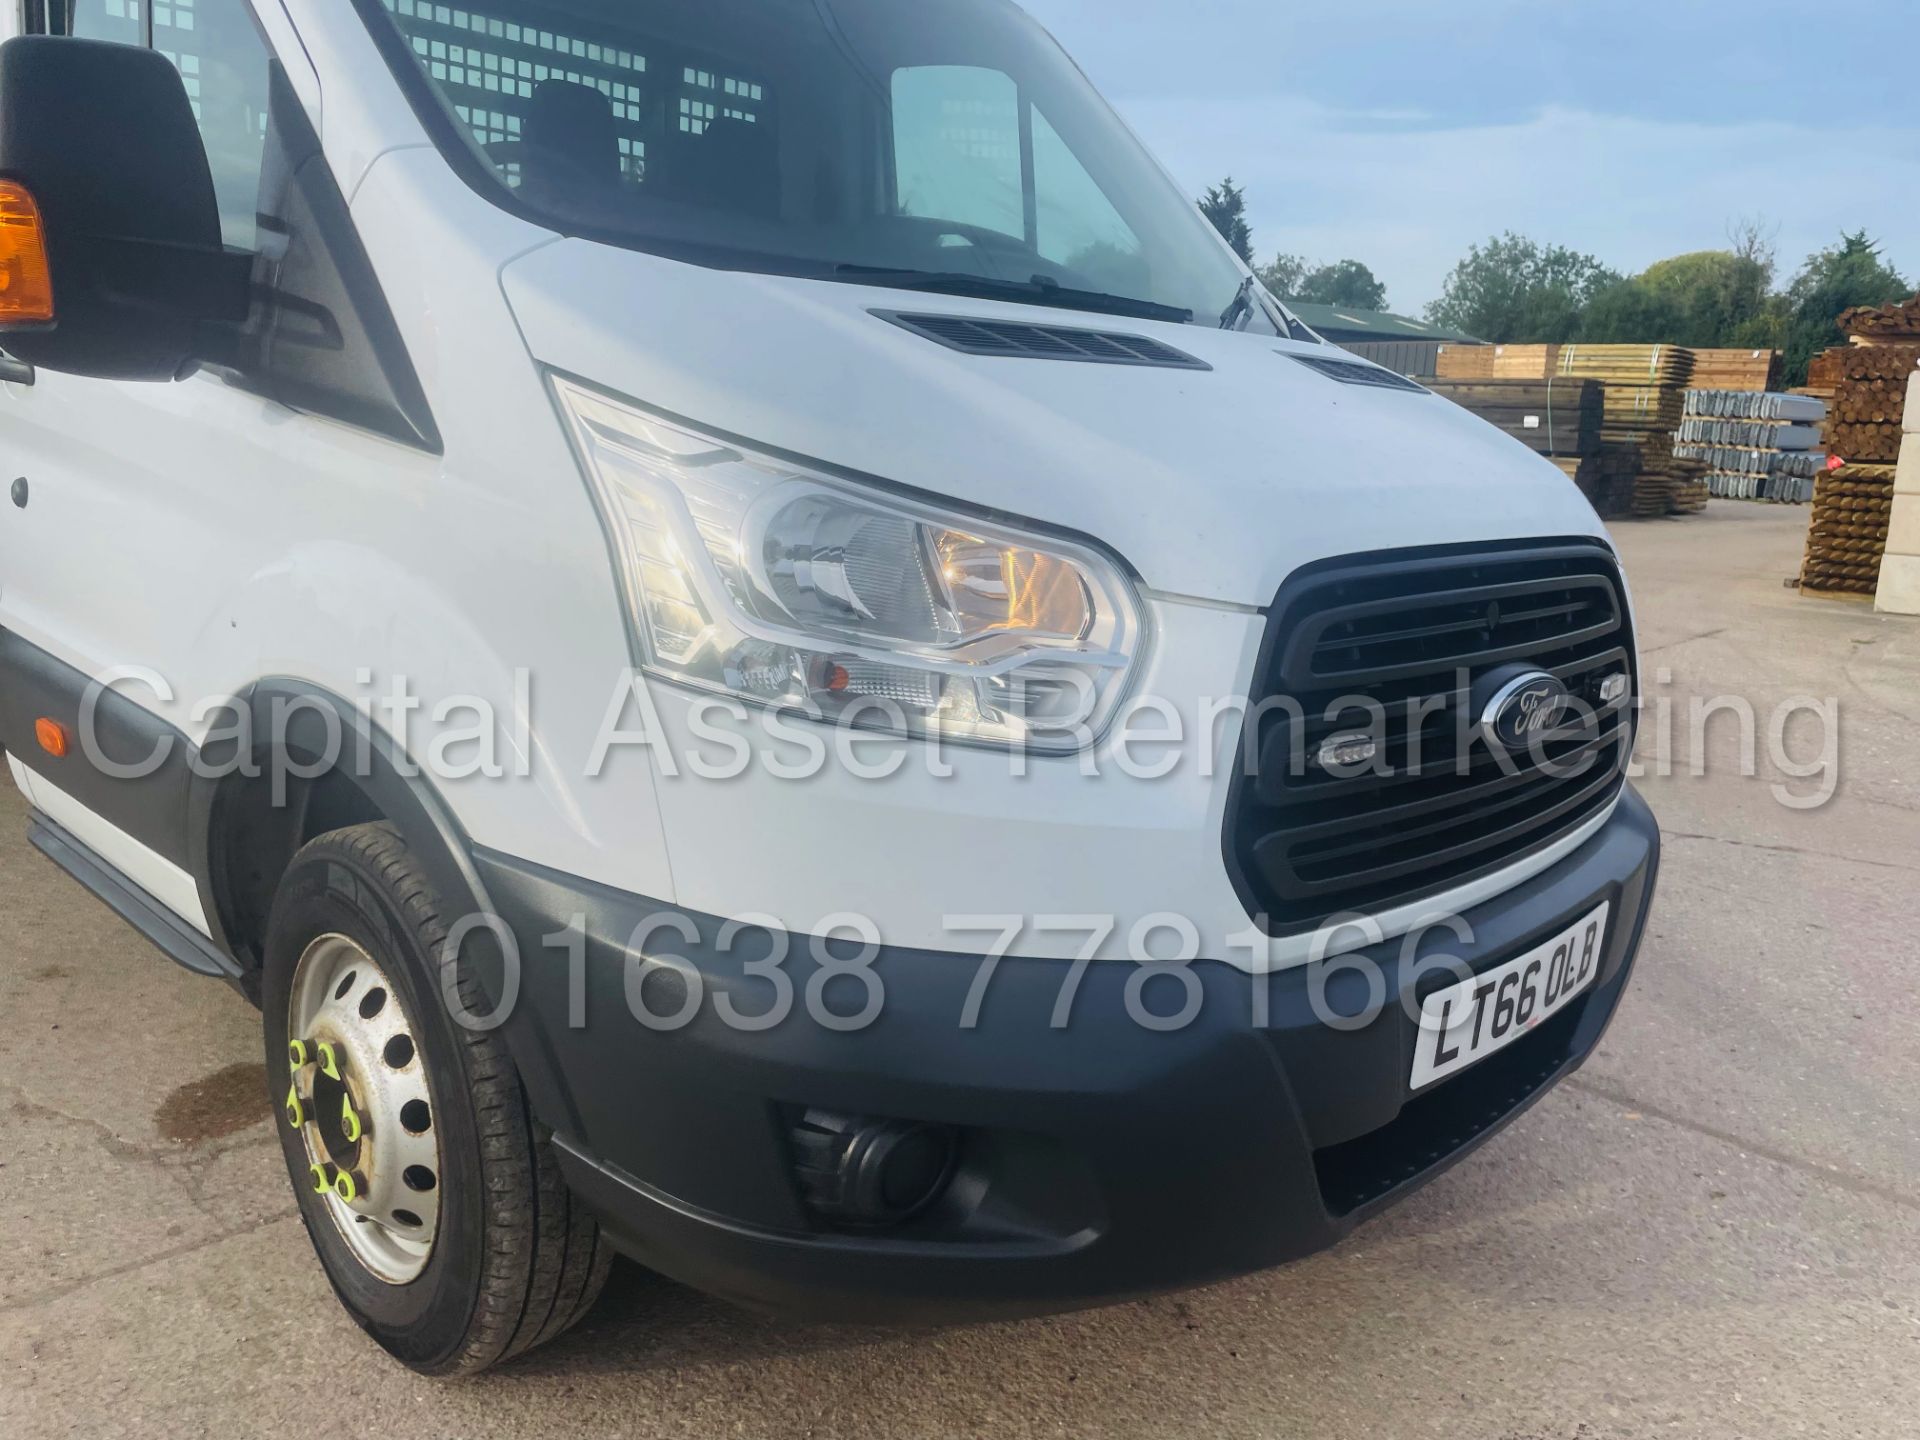 (On Sale) FORD TRANSIT 125 T350 *L4 - XLWB DROPSIDE TRUCK* (2017 - EURO 6) '2.2 TDCI - 6 SPEED' - Image 15 of 40